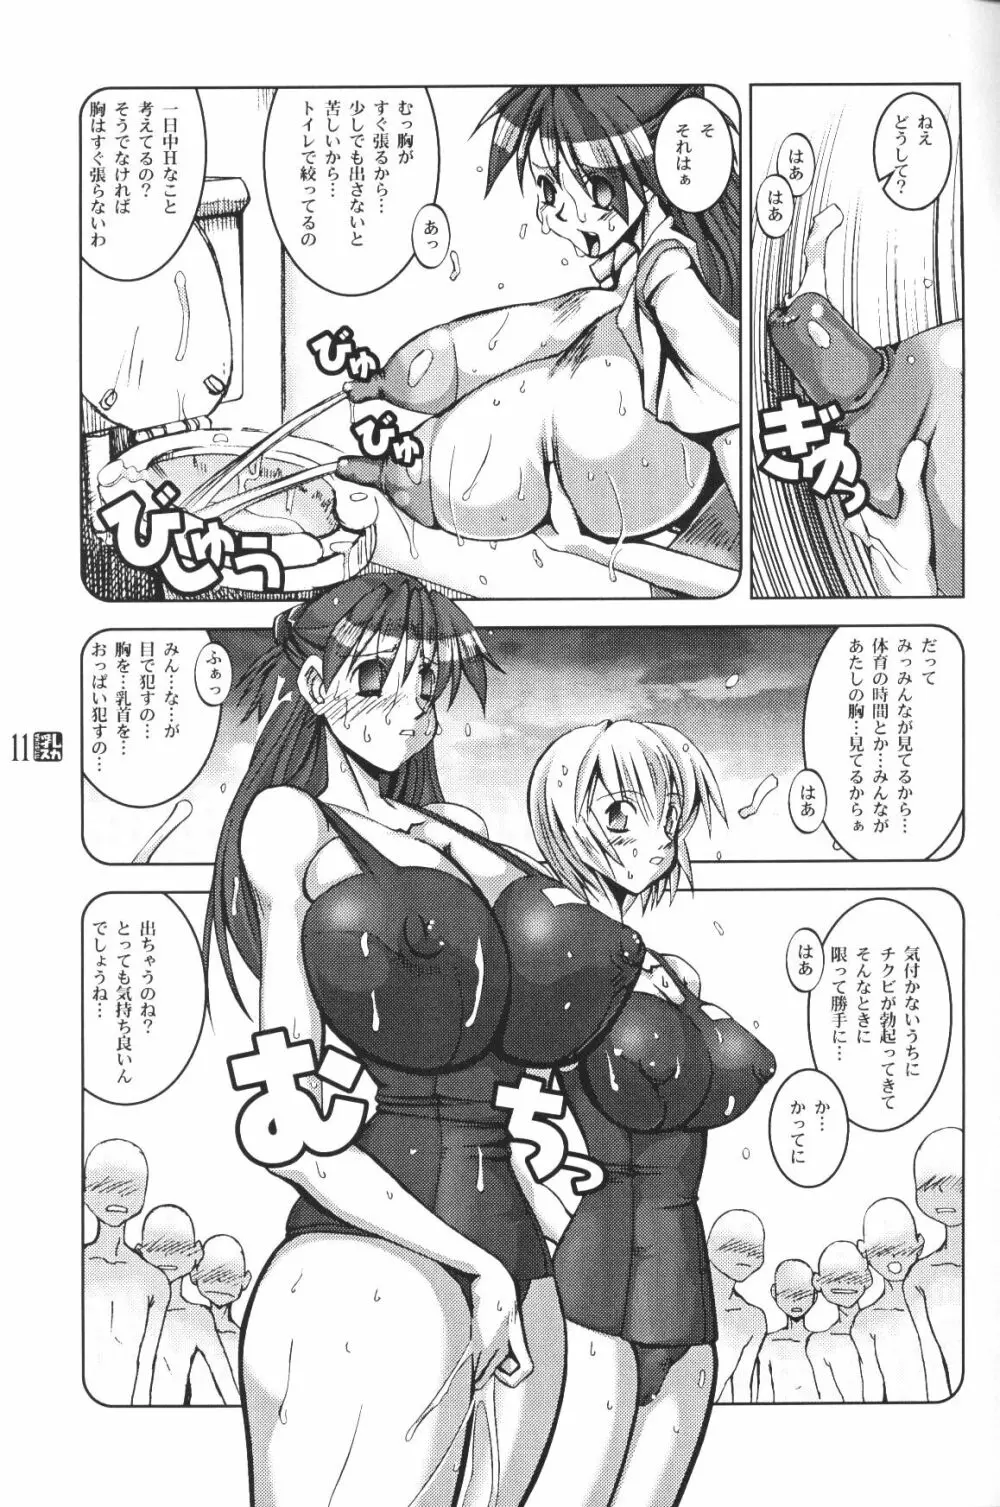 PLEATED GUNNER #09 BLACK AND WHITE 乳スカ Page.10